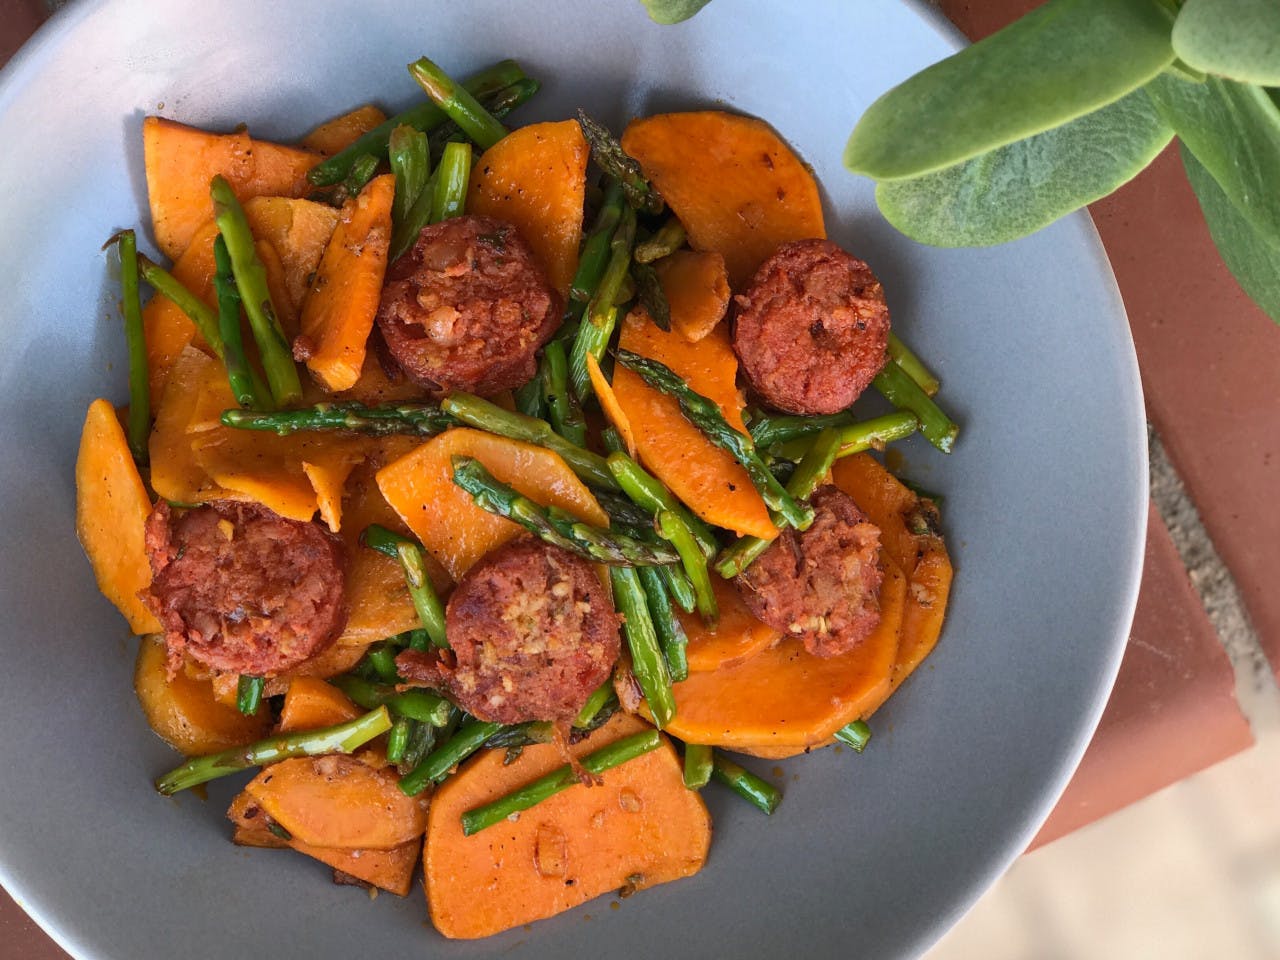 One-pot dish with sweet potato, green asparagus and sausage